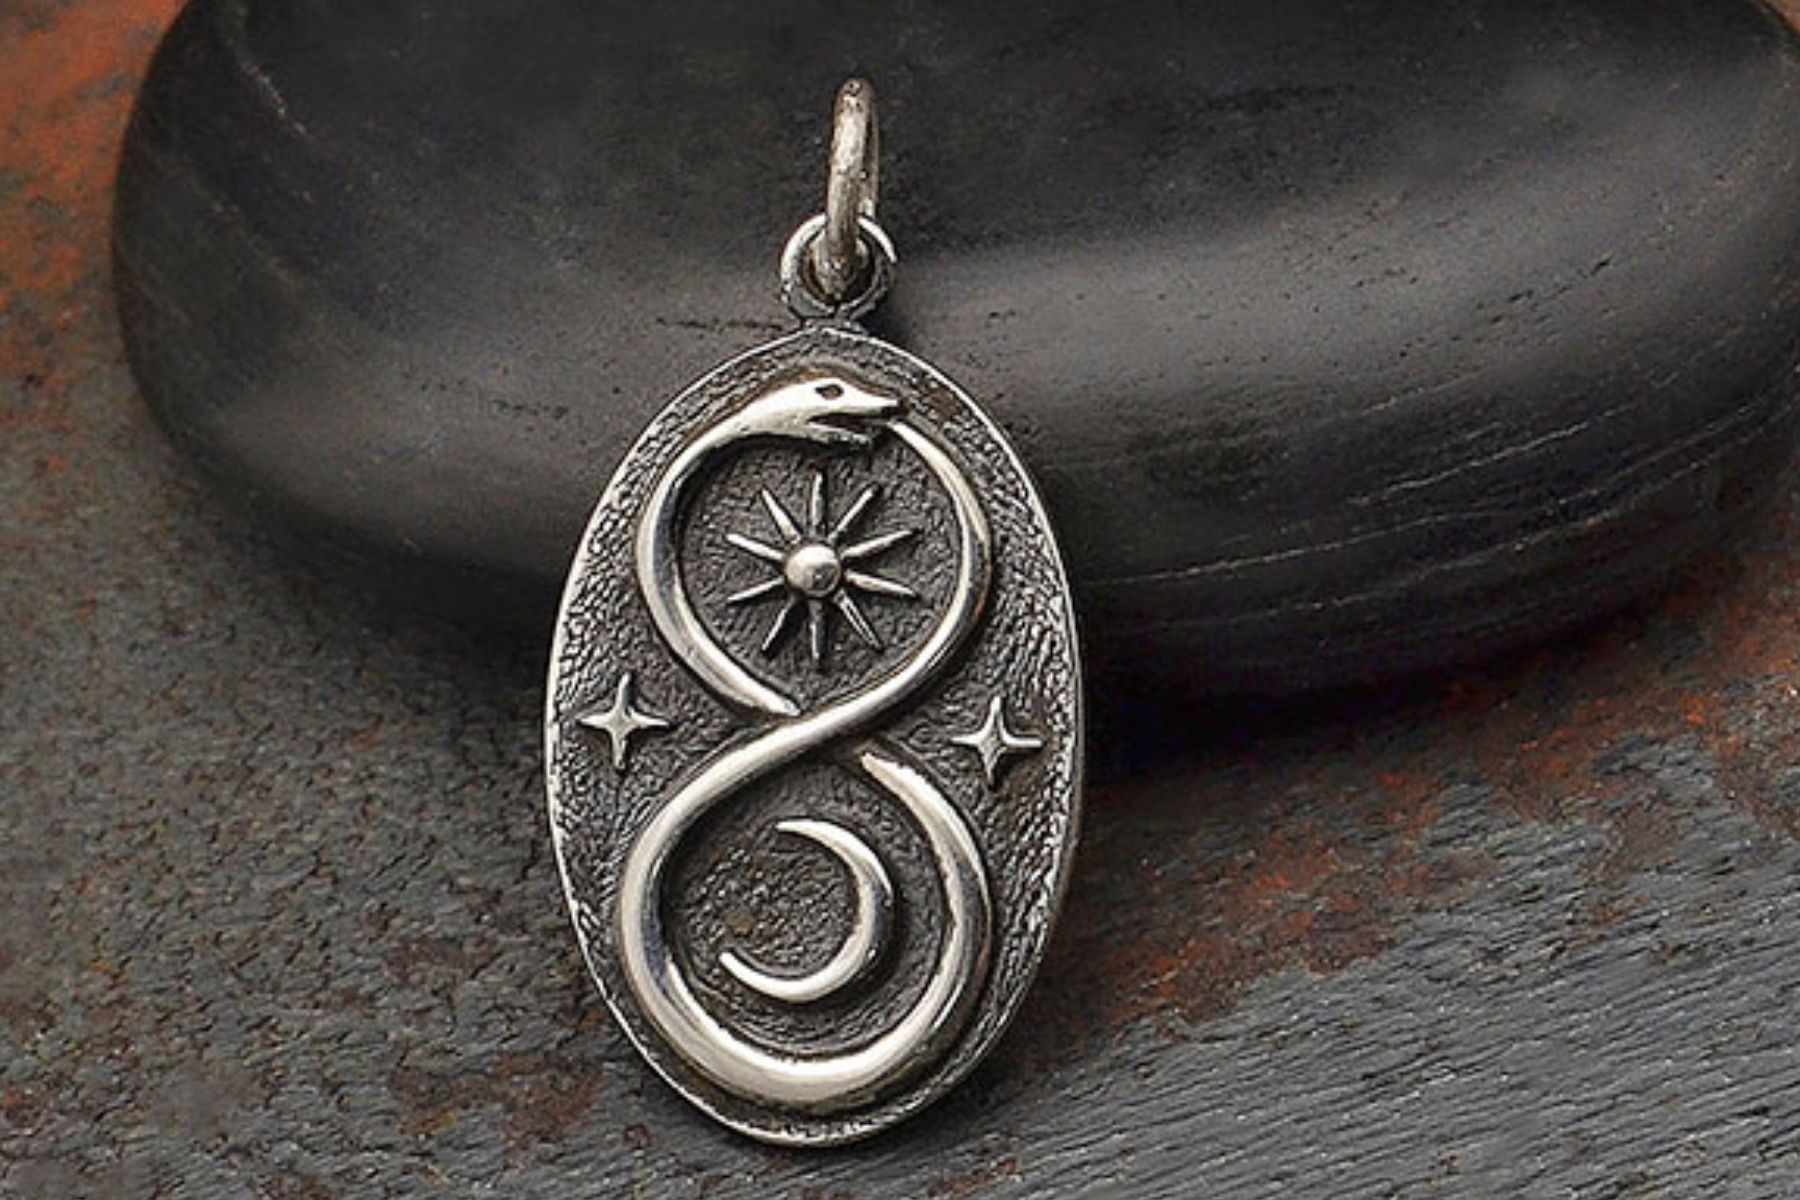 A platinum pendant with sun, moon, and snake signs